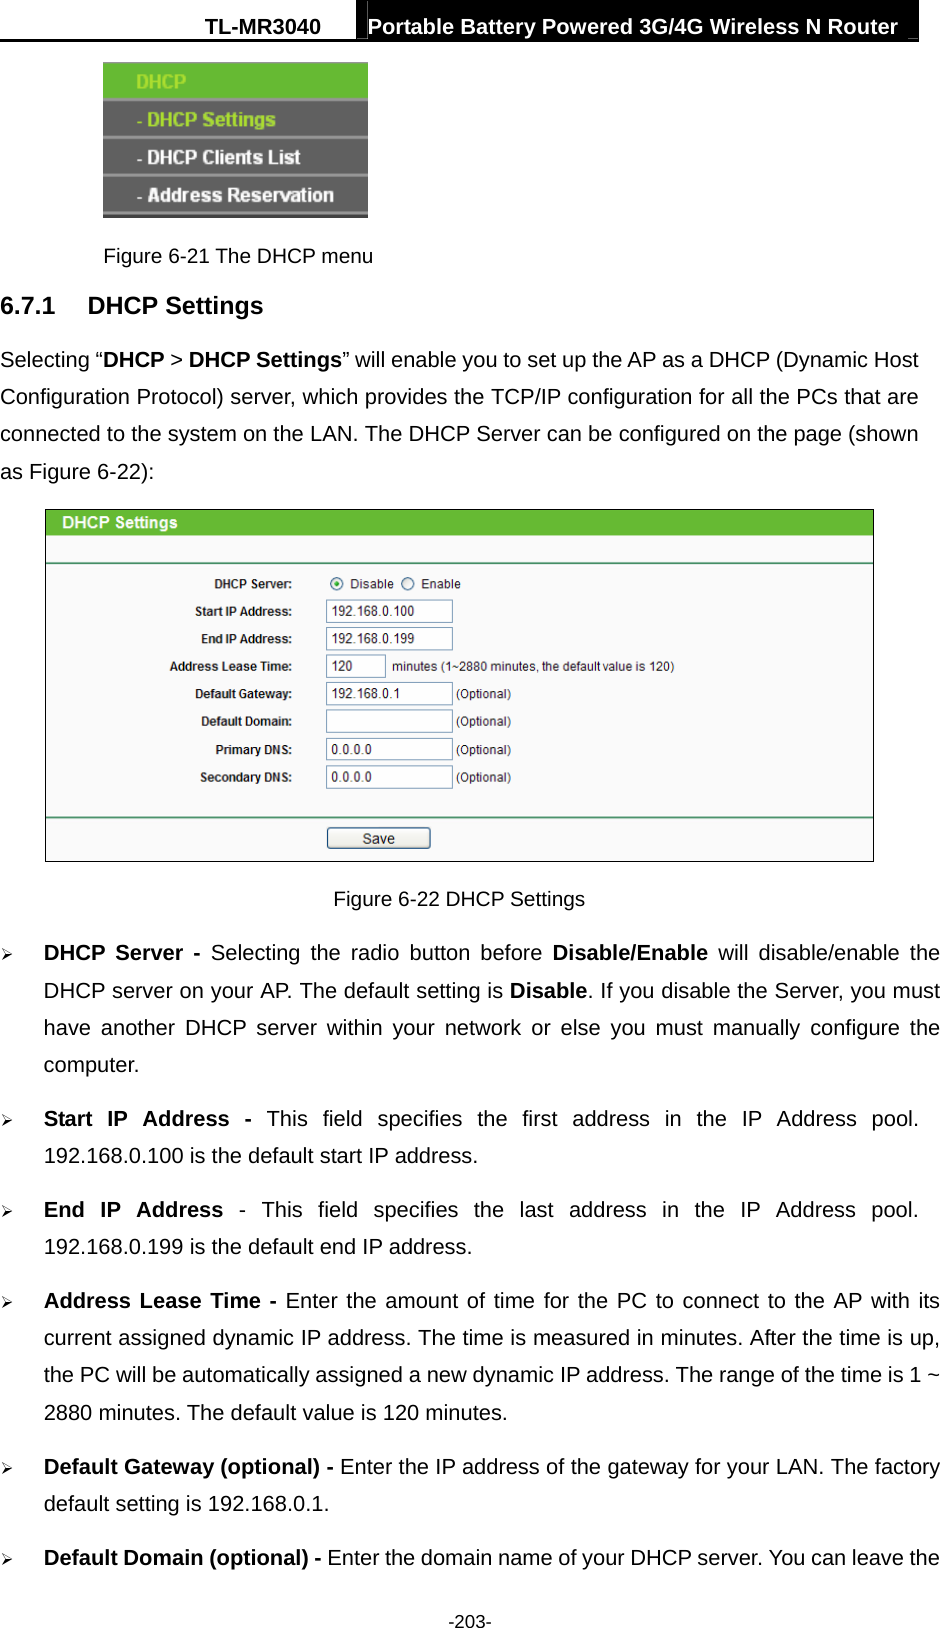 TL-MR3040  Portable Battery Powered 3G/4G Wireless N Router  -203-  Figure 6-21 The DHCP menu 6.7.1  DHCP Settings Selecting “DHCP &gt; DHCP Settings” will enable you to set up the AP as a DHCP (Dynamic Host Configuration Protocol) server, which provides the TCP/IP configuration for all the PCs that are connected to the system on the LAN. The DHCP Server can be configured on the page (shown as Figure 6-22):  Figure 6-22 DHCP Settings ¾ DHCP Server - Selecting the radio button before Disable/Enable will disable/enable the DHCP server on your AP. The default setting is Disable. If you disable the Server, you must have another DHCP server within your network or else you must manually configure the computer. ¾ Start IP Address - This field specifies the first address in the IP Address pool. 192.168.0.100 is the default start IP address.   ¾ End IP Address - This field specifies the last address in the IP Address pool. 192.168.0.199 is the default end IP address.   ¾ Address Lease Time - Enter the amount of time for the PC to connect to the AP with its current assigned dynamic IP address. The time is measured in minutes. After the time is up, the PC will be automatically assigned a new dynamic IP address. The range of the time is 1 ~ 2880 minutes. The default value is 120 minutes. ¾ Default Gateway (optional) - Enter the IP address of the gateway for your LAN. The factory default setting is 192.168.0.1. ¾ Default Domain (optional) - Enter the domain name of your DHCP server. You can leave the 